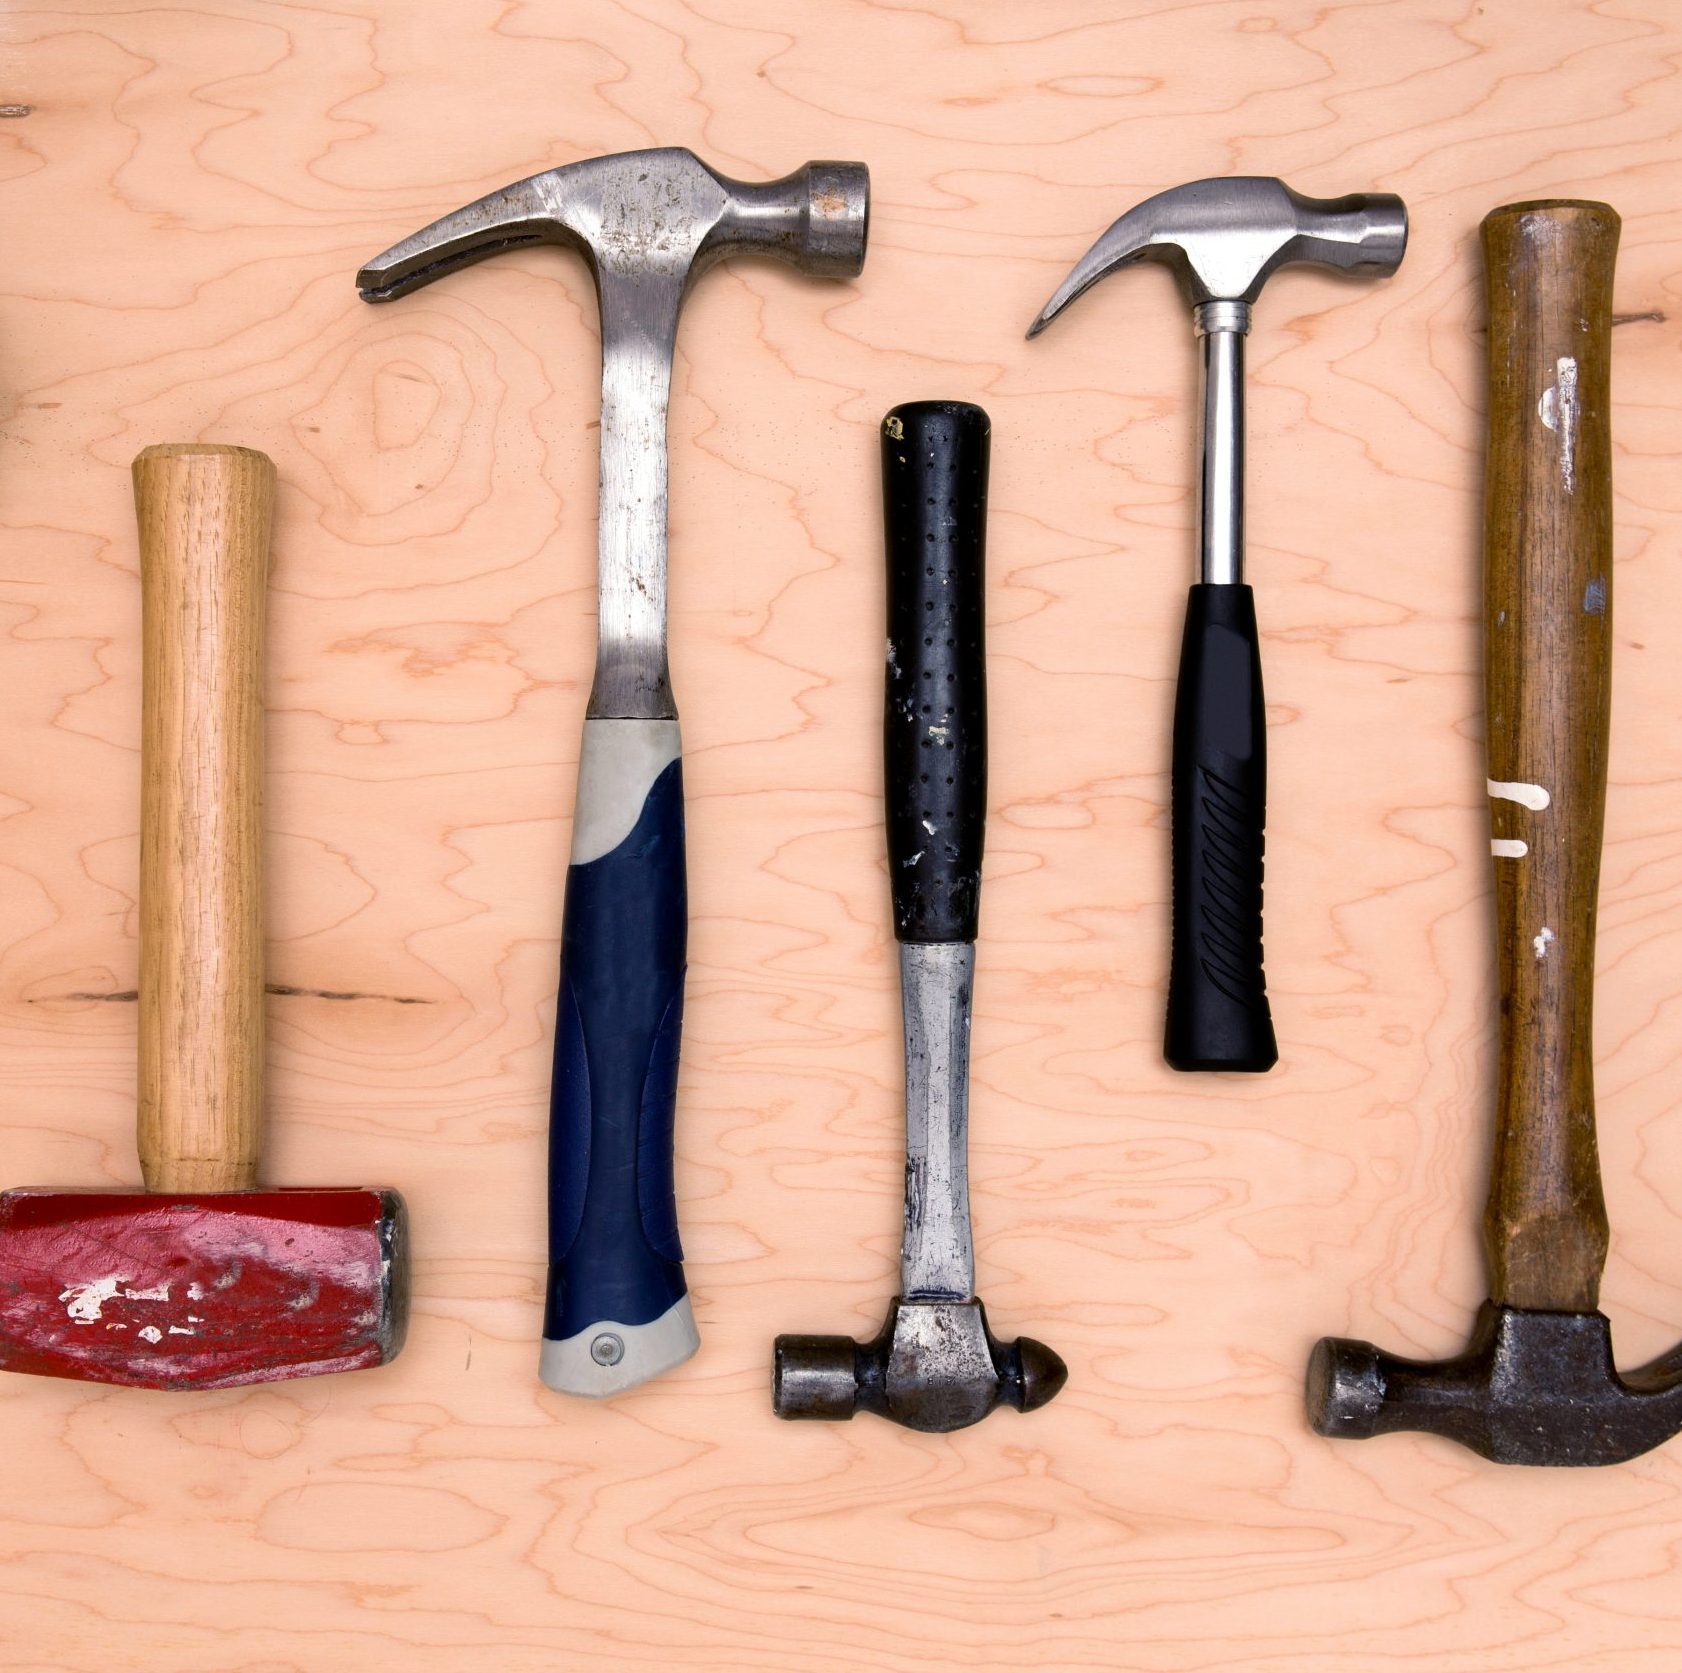 Carpenters' Roofing Hammers, Claw Hammers